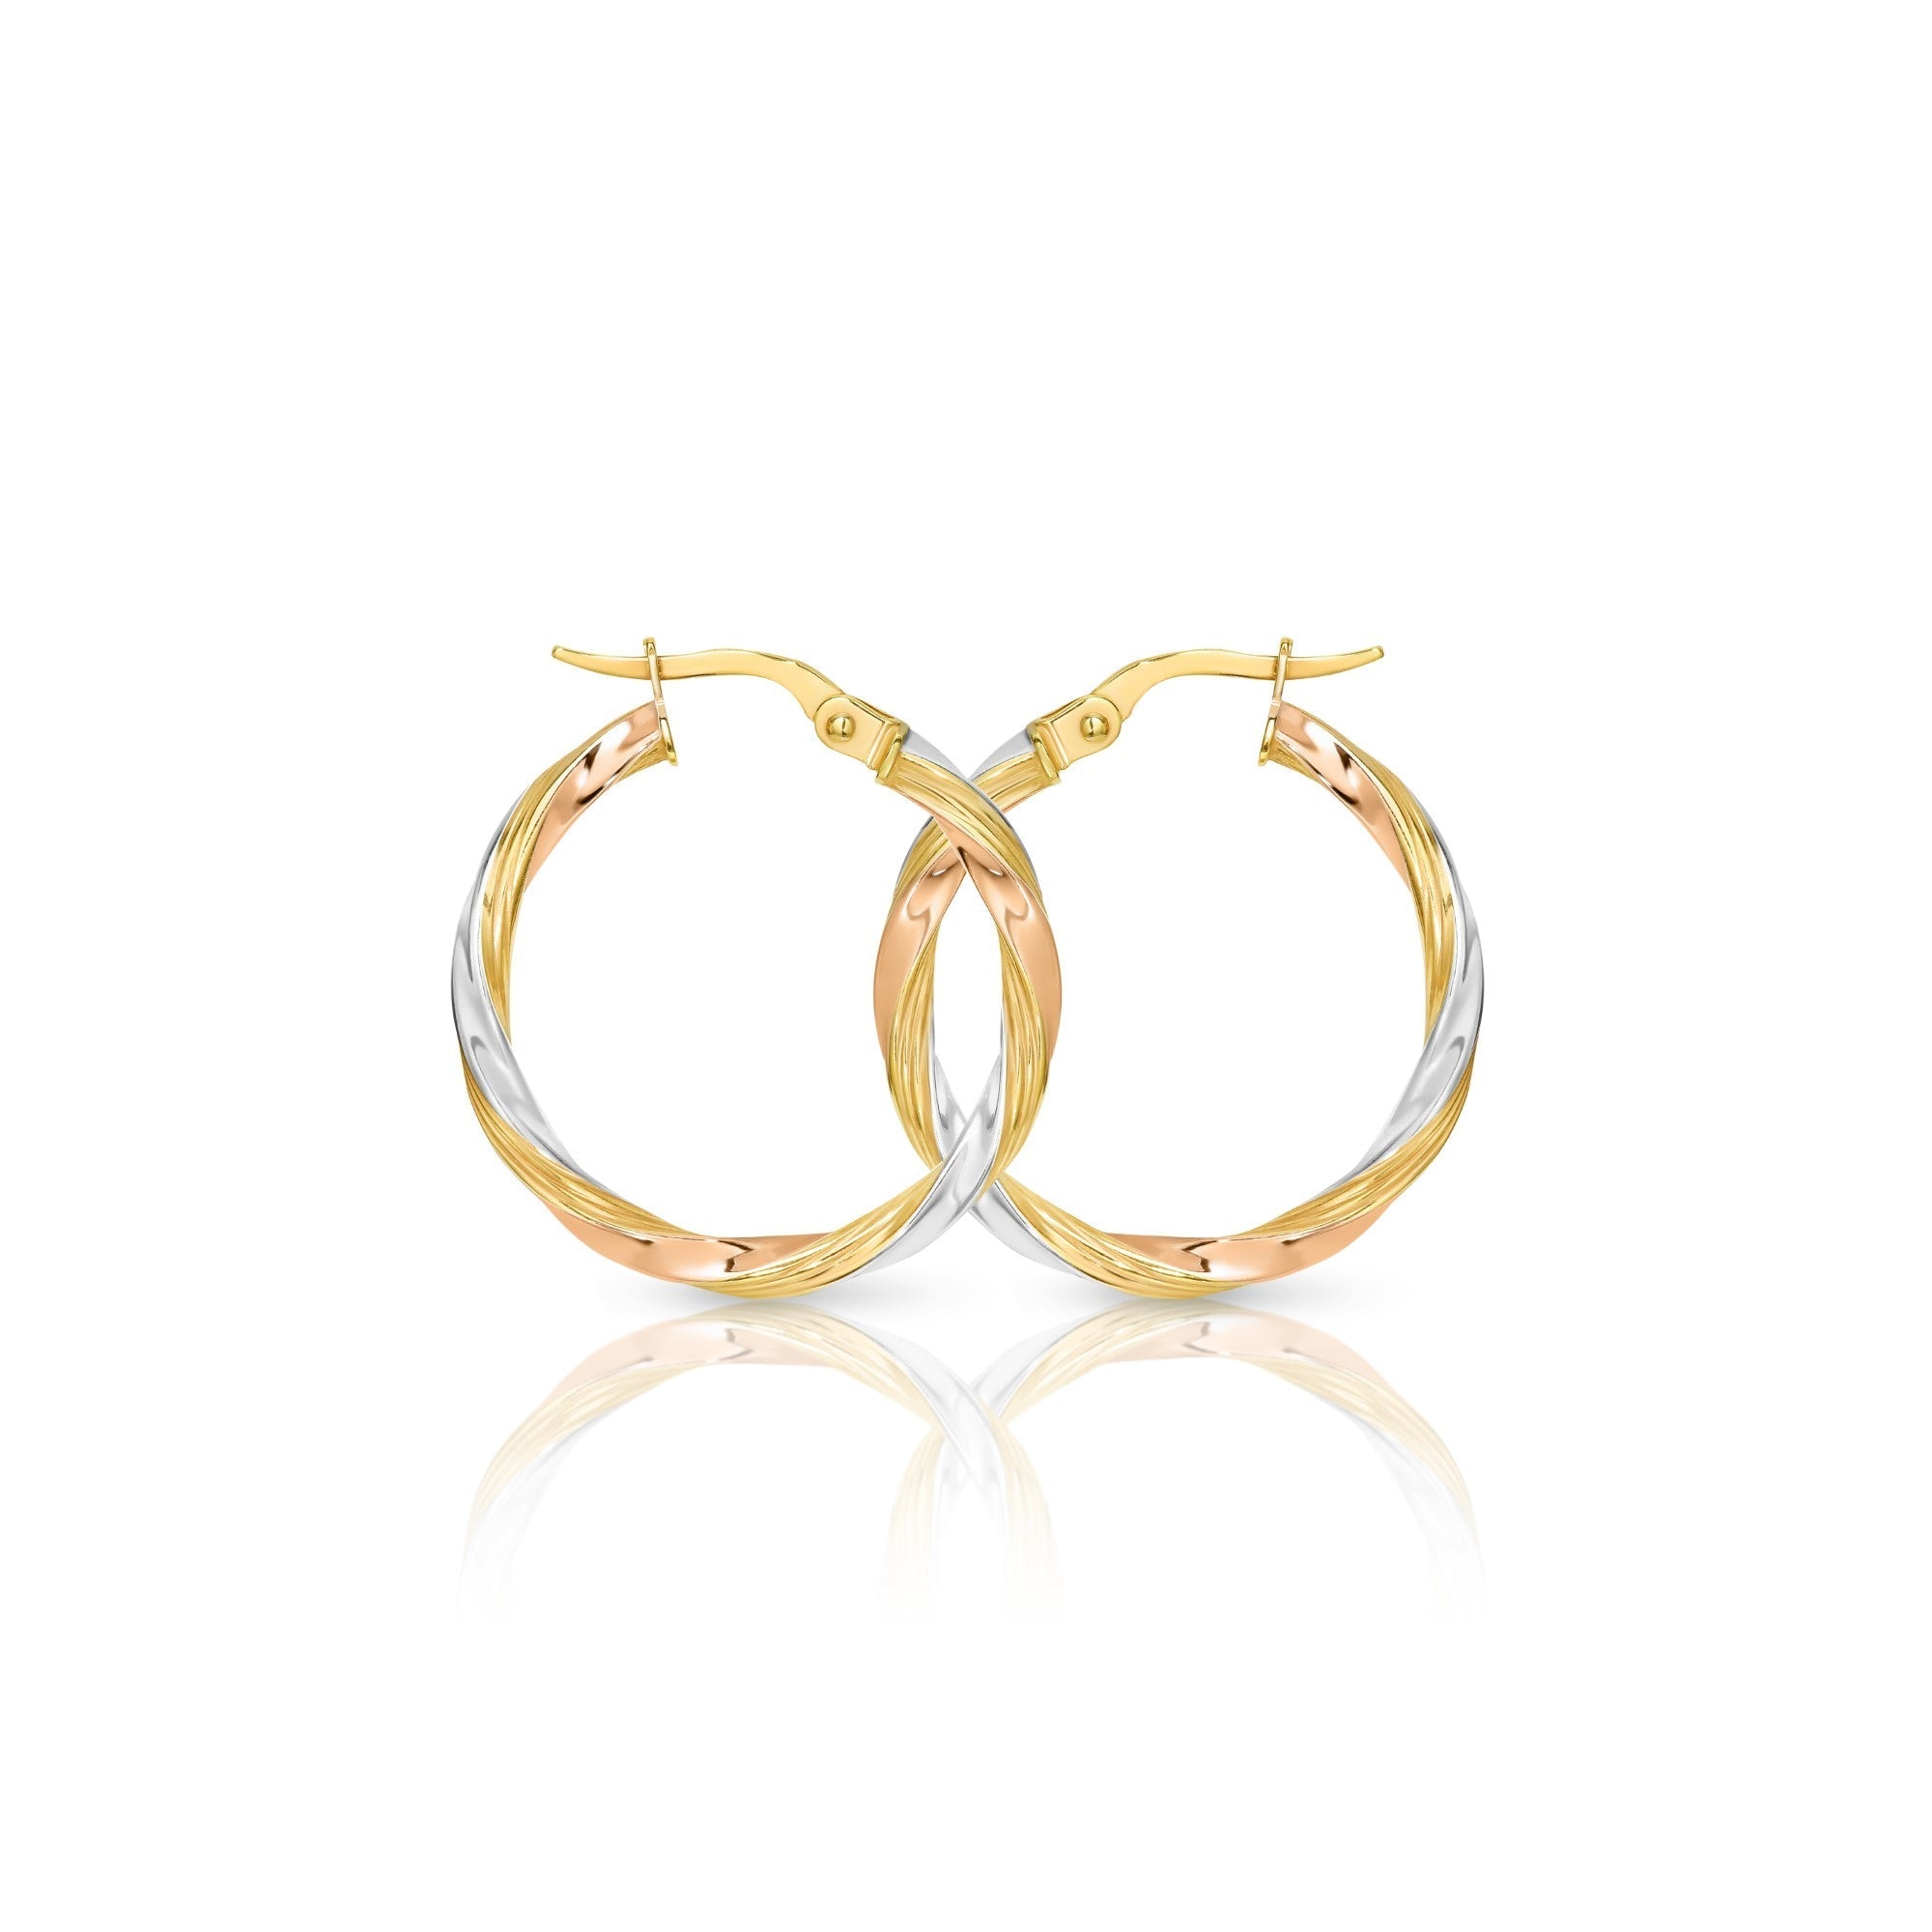 Product Type_Earrings, XMAS 2022, Metal Colour_Yellow Gold, Metal Type_9k Yellow Gold,  (7411004604580)